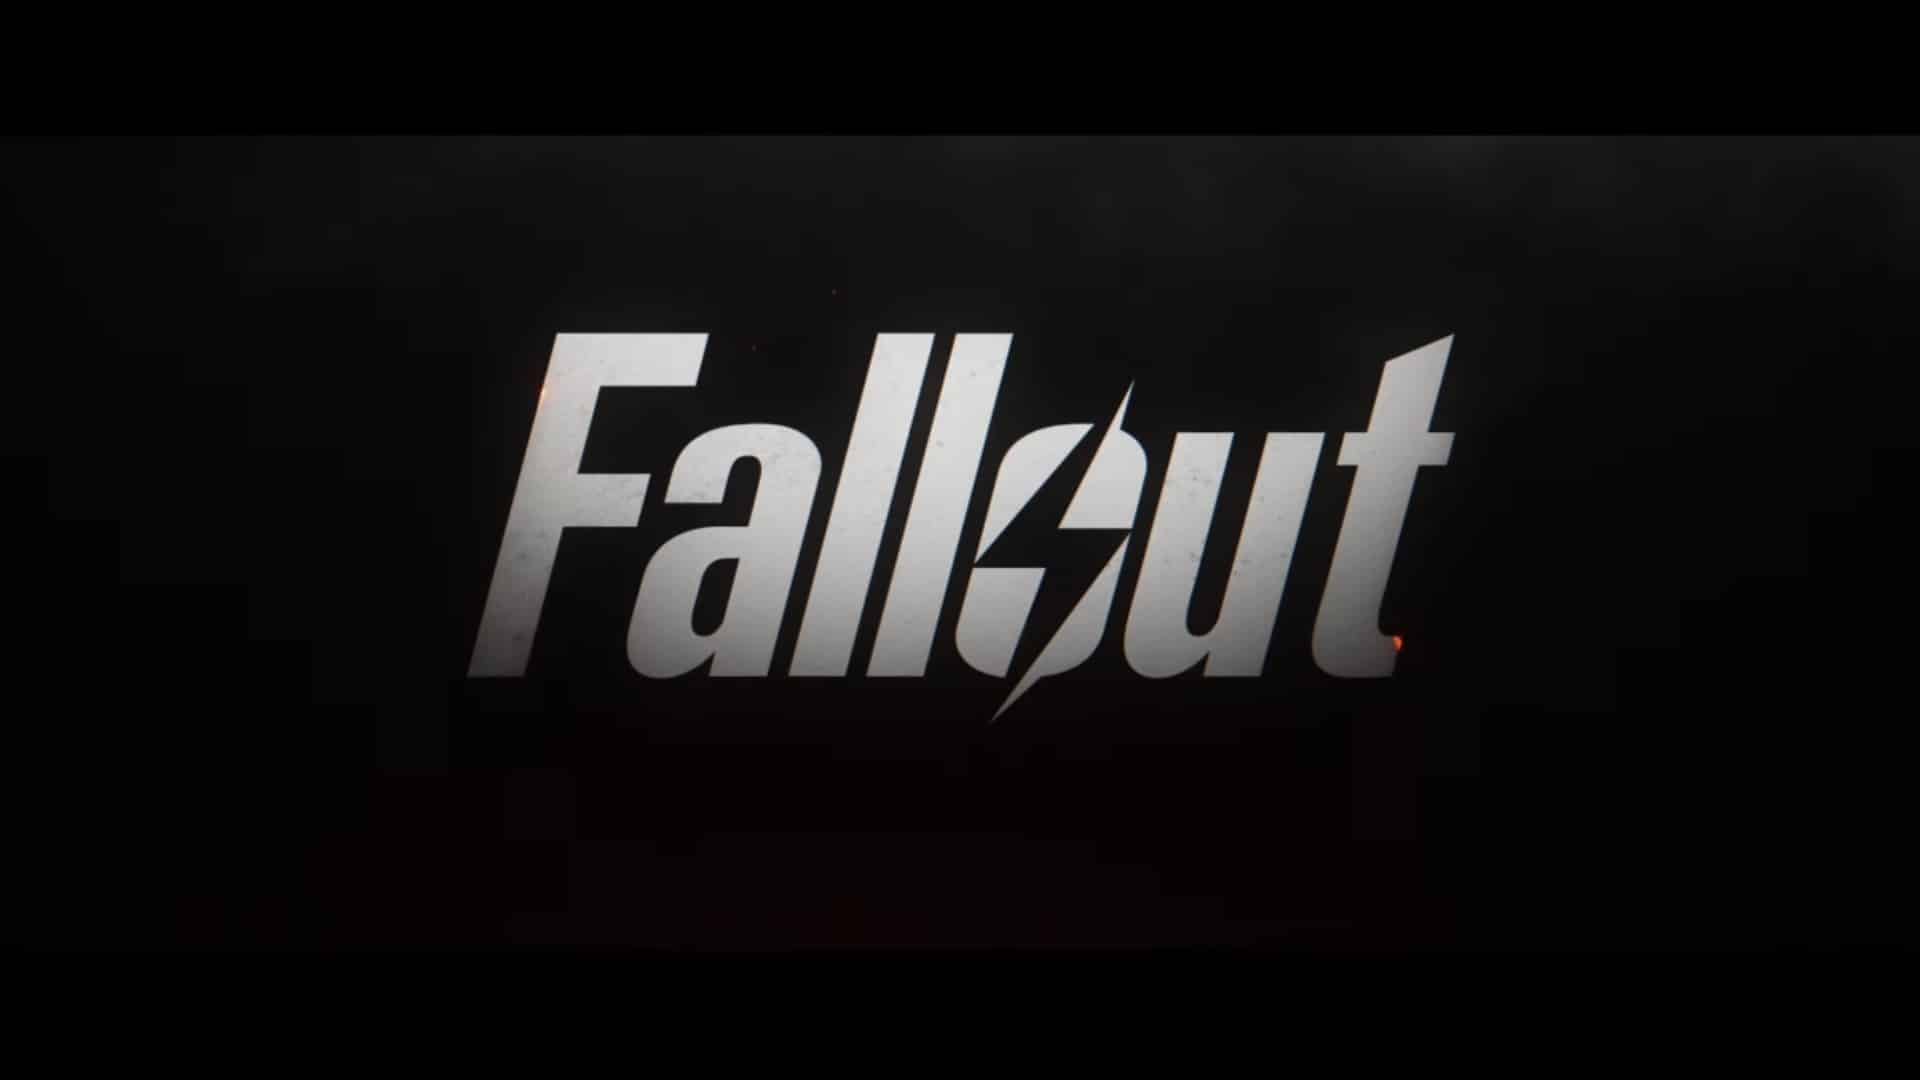 Amazon Starts a Flame in Fallout Fans’ Hearts With Official Fallout Series Trailer